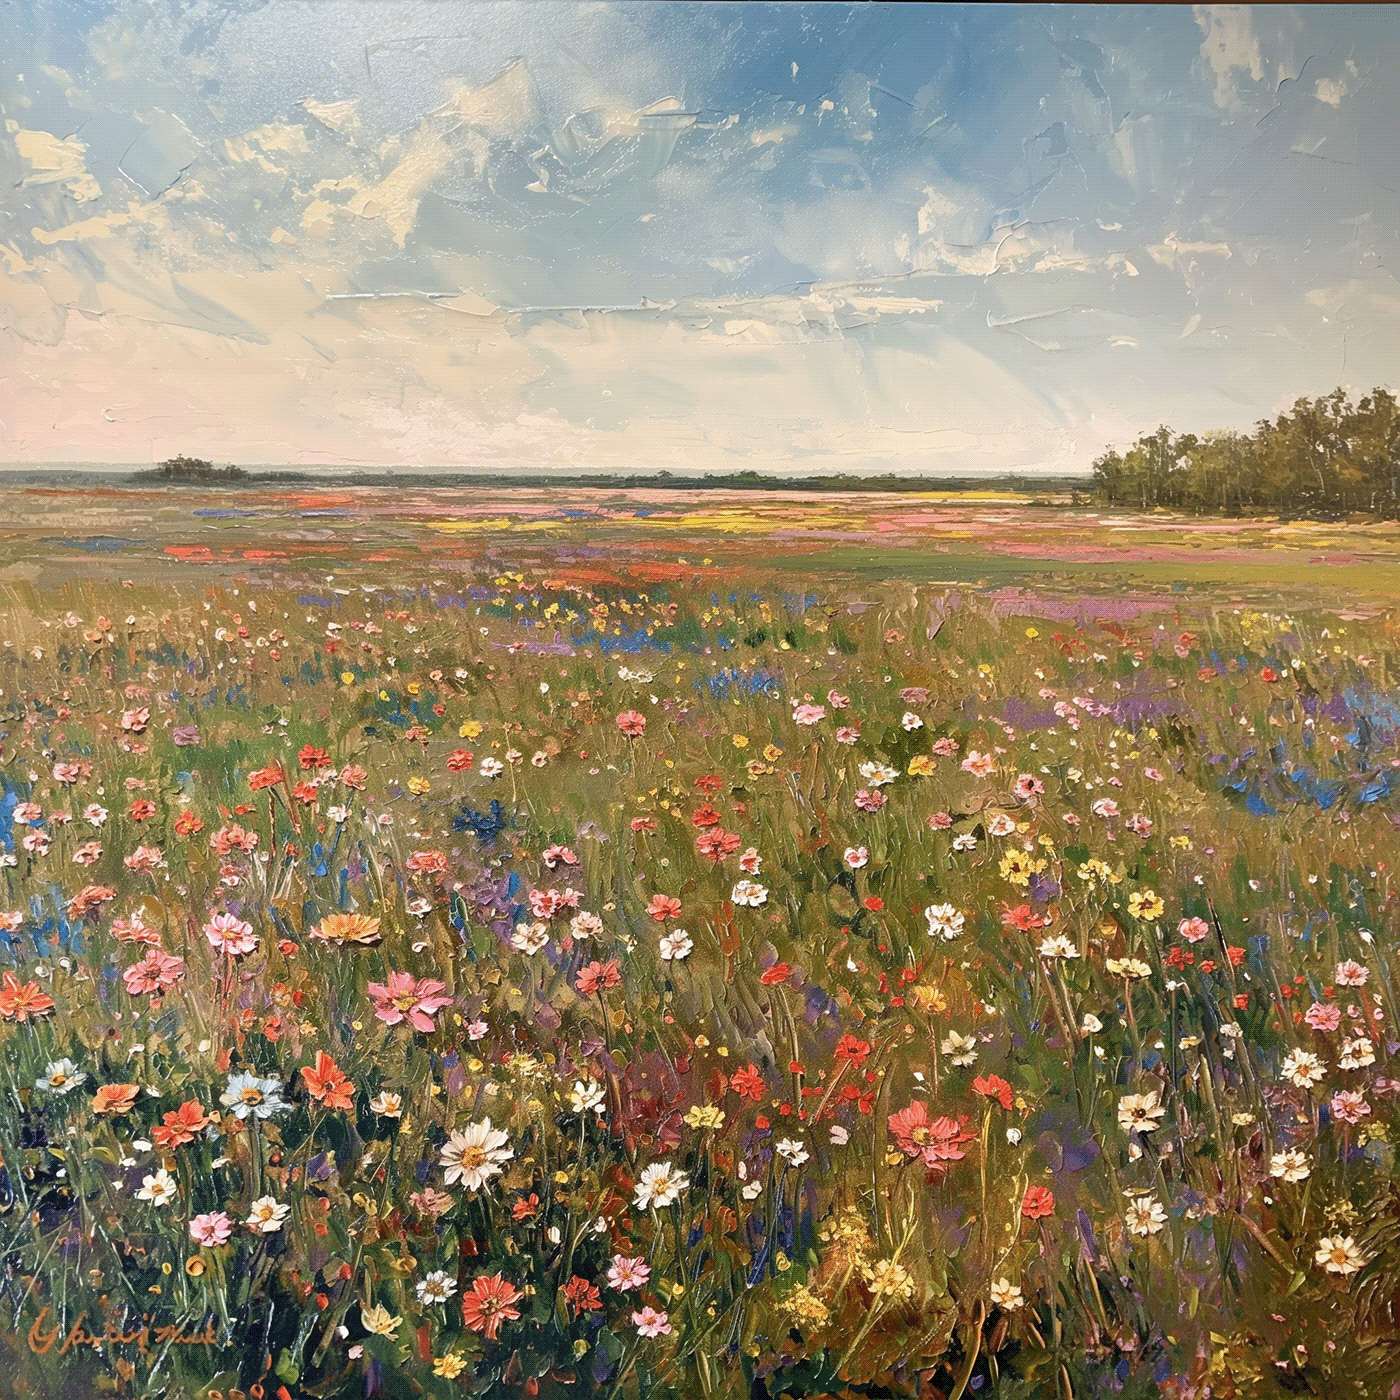 "Dancing hues in nature's canvas, a field of wildflowers painted in the strokes of impressionism. 🎨